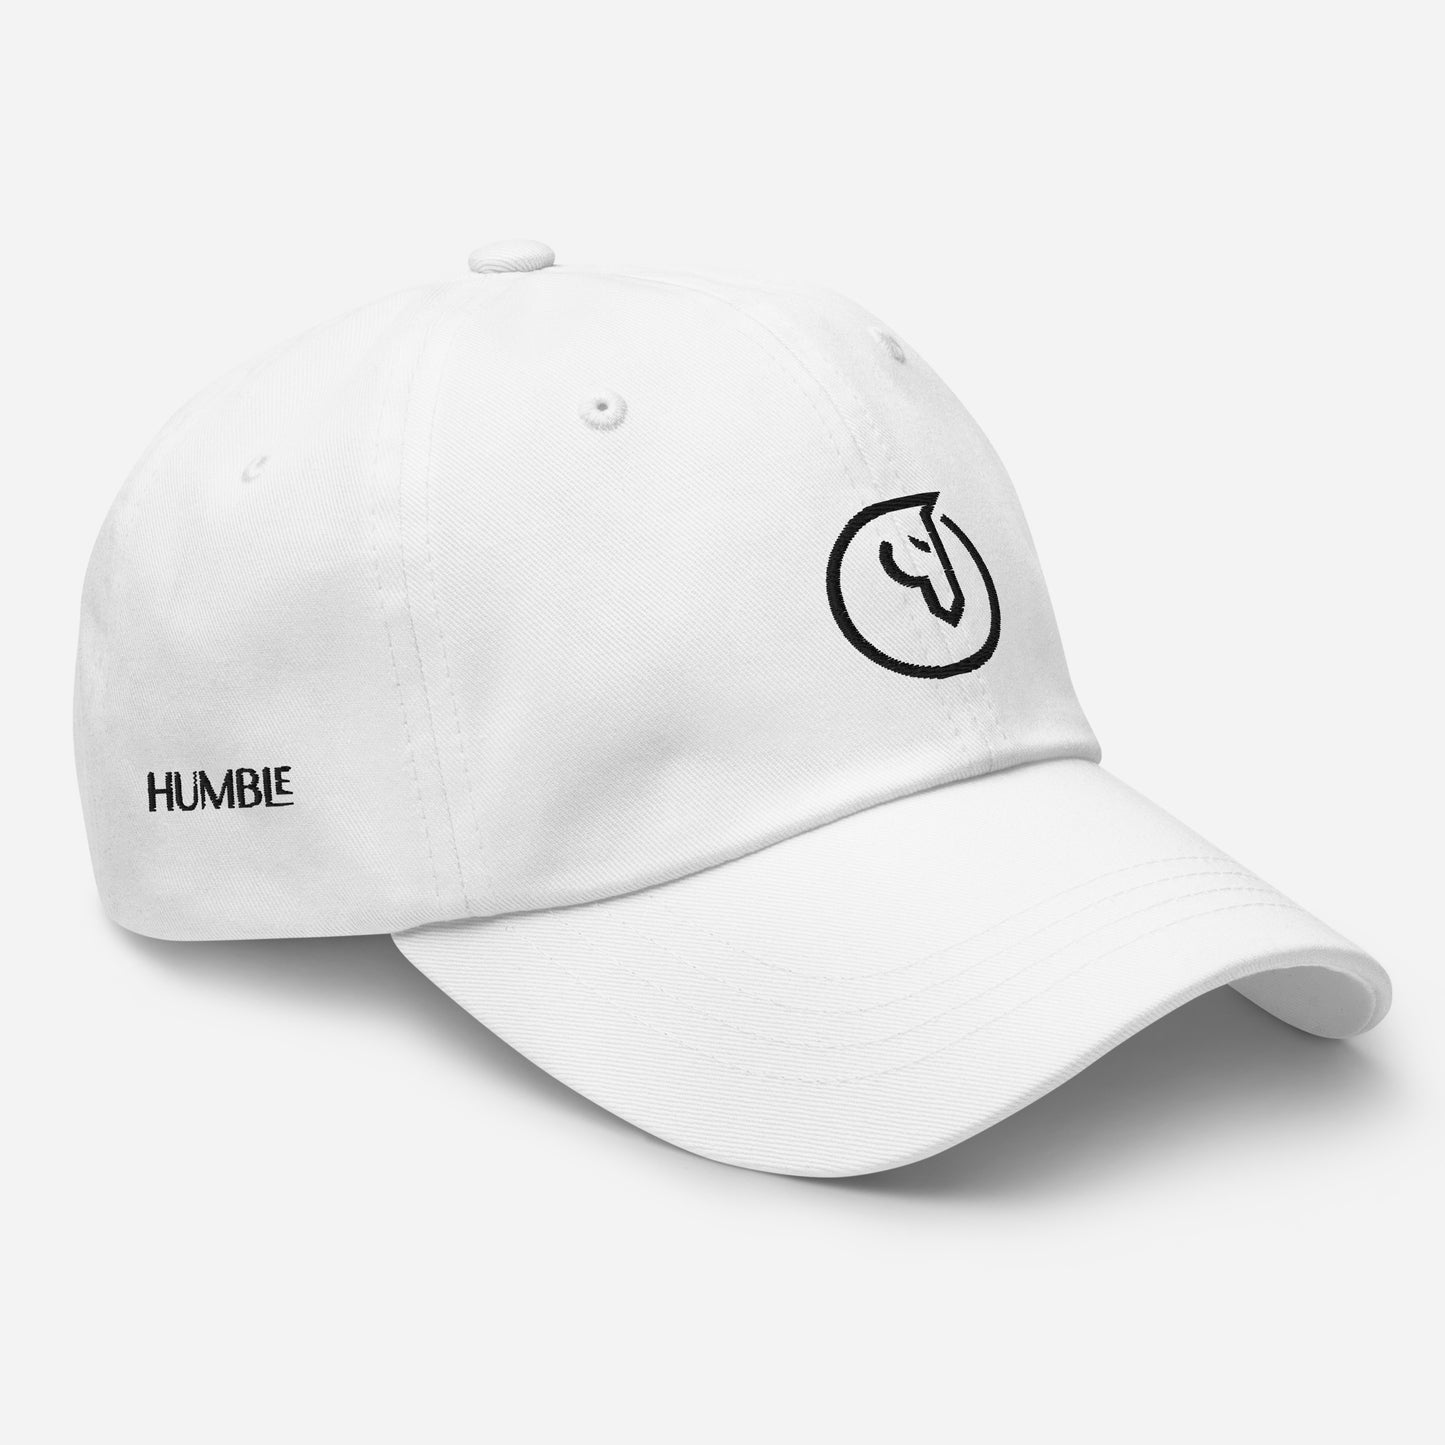 Humble Sportswear, unisex baseball cap, dad caps, casual hats for men, casual hats for women